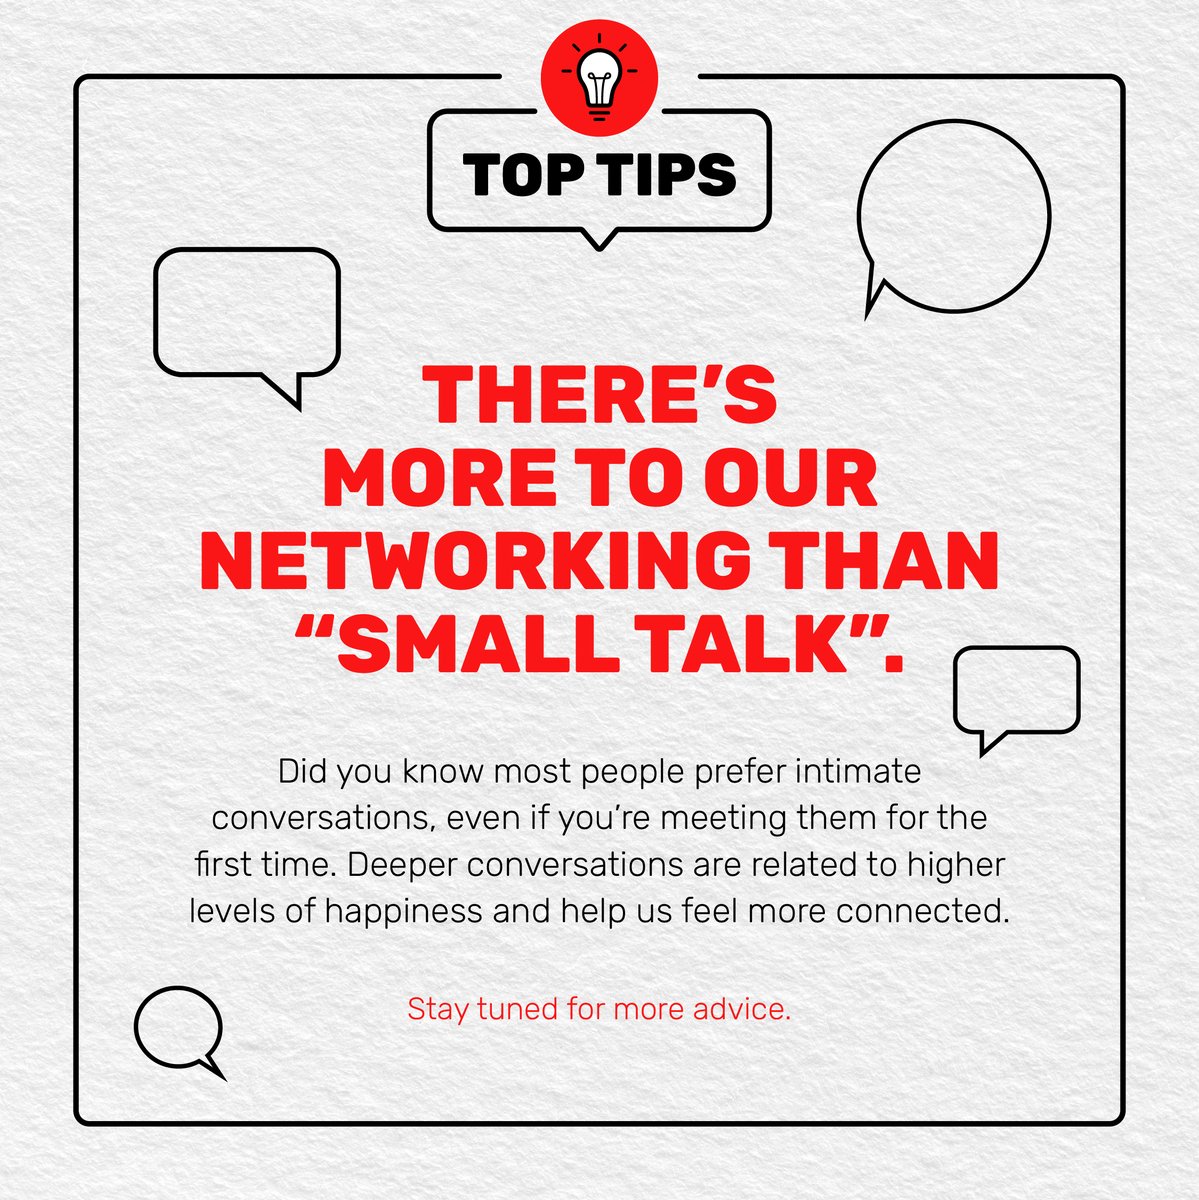 Dive deeper with ITW Networking! Are you ready to go deep beneath the surface with ITW Networking? Let's skip the small talk and embark on a journey of genuine connections and meaningful conversations.

#ITW #InTouchWith #ITWFamily #FODC #FieldofDreamsClub #MeaningfulConnections